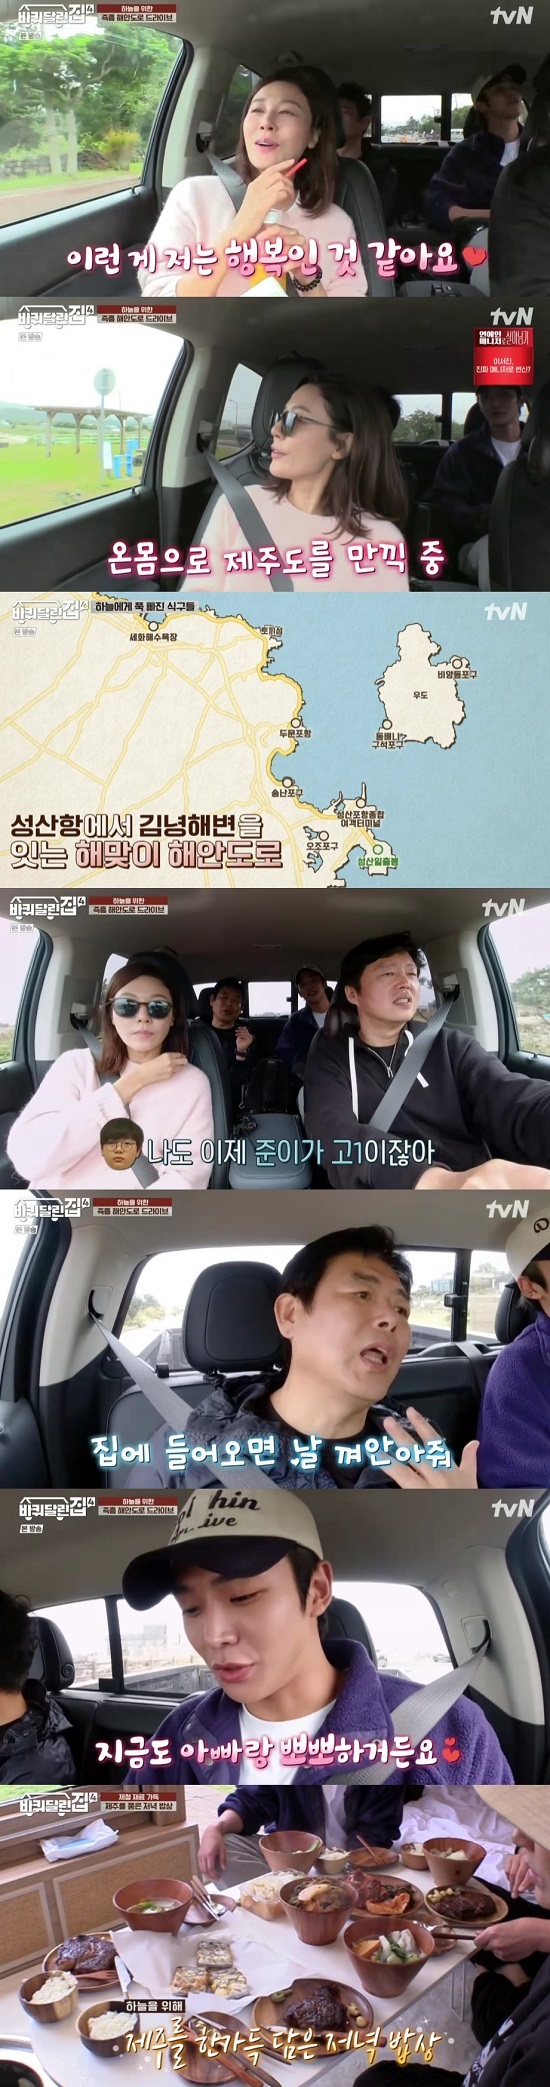 House on wheels 4 Sung Dong-il expressed his gratitude for son.In the TVN Wheeled House 4 (hereinafter referred to as Badal House 4), which was broadcast on the 3rd, Sung Dong-il, Kim Hee-won, RO WOON and Kim Ha-neul who left Jeju Island were depicted.On this day, the cast drove along the coast road.Kim Ha-neul responded, I think this is happiness. Its so good. While driving, RO WOON looked at a cafe and said, Oh? I came here with my mom.Kim Hee-won laughed, saying, Lets send a video letter to my mother.Sung Dong-il said, Im a senior in high school, too. Whenever I come home, he hugs me. I love that. RO WOON said, I still kiss my father.Kim Ha-neul asked, Do you kiss your father on the cheek? and RO WOON said yes.Sung Dong-il responded, Then its so pretty. How much more do you want to do your father? (RO WOON) is surprising.Kim Ha-neul envied, I should have raised it that way. After that, they spent a spare RO WOON time toward Seongsan Ilchulbong.RO WOON prepared food with Sung Dong-il and said, It was sad that my father was getting older. I went with my sister and my mother, but Father seemed lonely.I also try to spend time with my father, so I told him that there are things I want to express more.Its great, I envy you, Im listening to you, Sung Dong-il exclaimed.Actor Kim Min-ha appeared as a guest in the trailer at the end of the broadcast, raising expectations.Meanwhile, Sung Dong-il married his wife Park Kyung-hye in 2003 and has son Sung Joon, daughter Sung Bin, and daughter Sung Yul Yang.Last year, Sung Dong-ils son Sung Joon entered the school, including Daegu Science High School.Photo=tvN broadcast screen